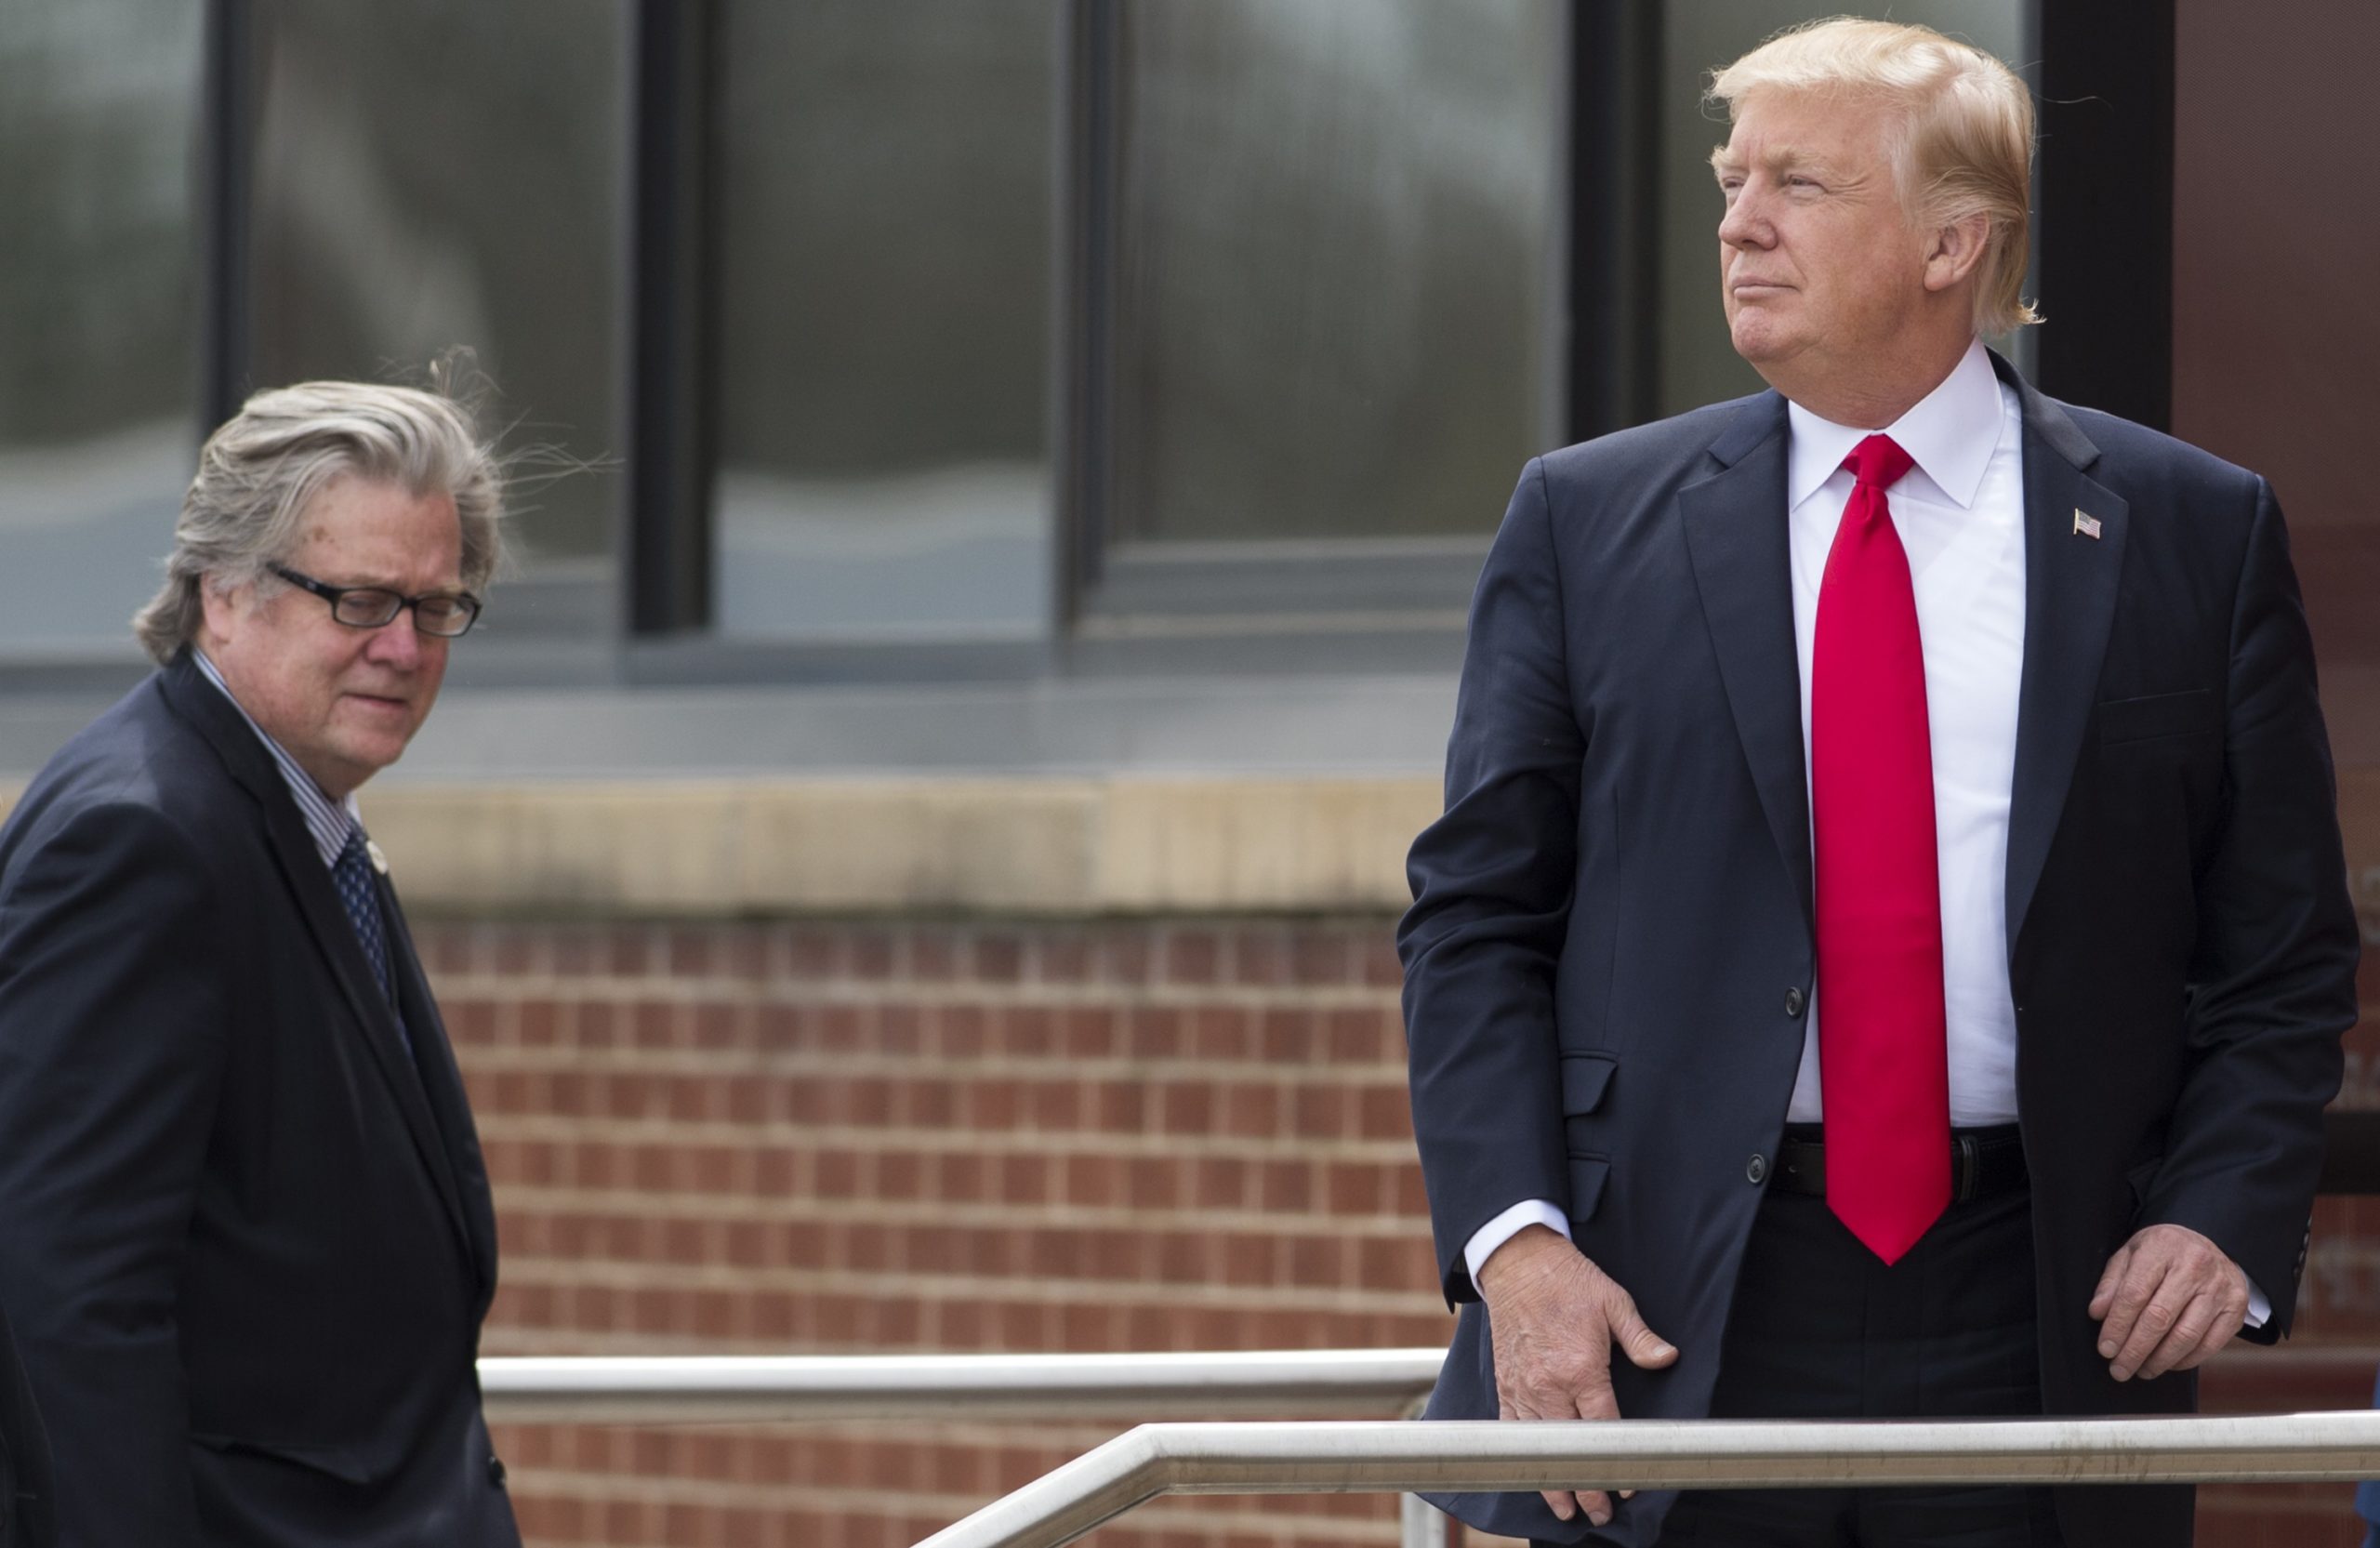 US President Donald Trump stands alongside Chief Strategist Stephen Bannon (L) upon arrival at Snap-On Tools in Kenosha, Wisconsin, April 18, 2017, prior to signing the Buy American, Hire American Executive Order. (SAUL LOEB/AFP via Getty Images)